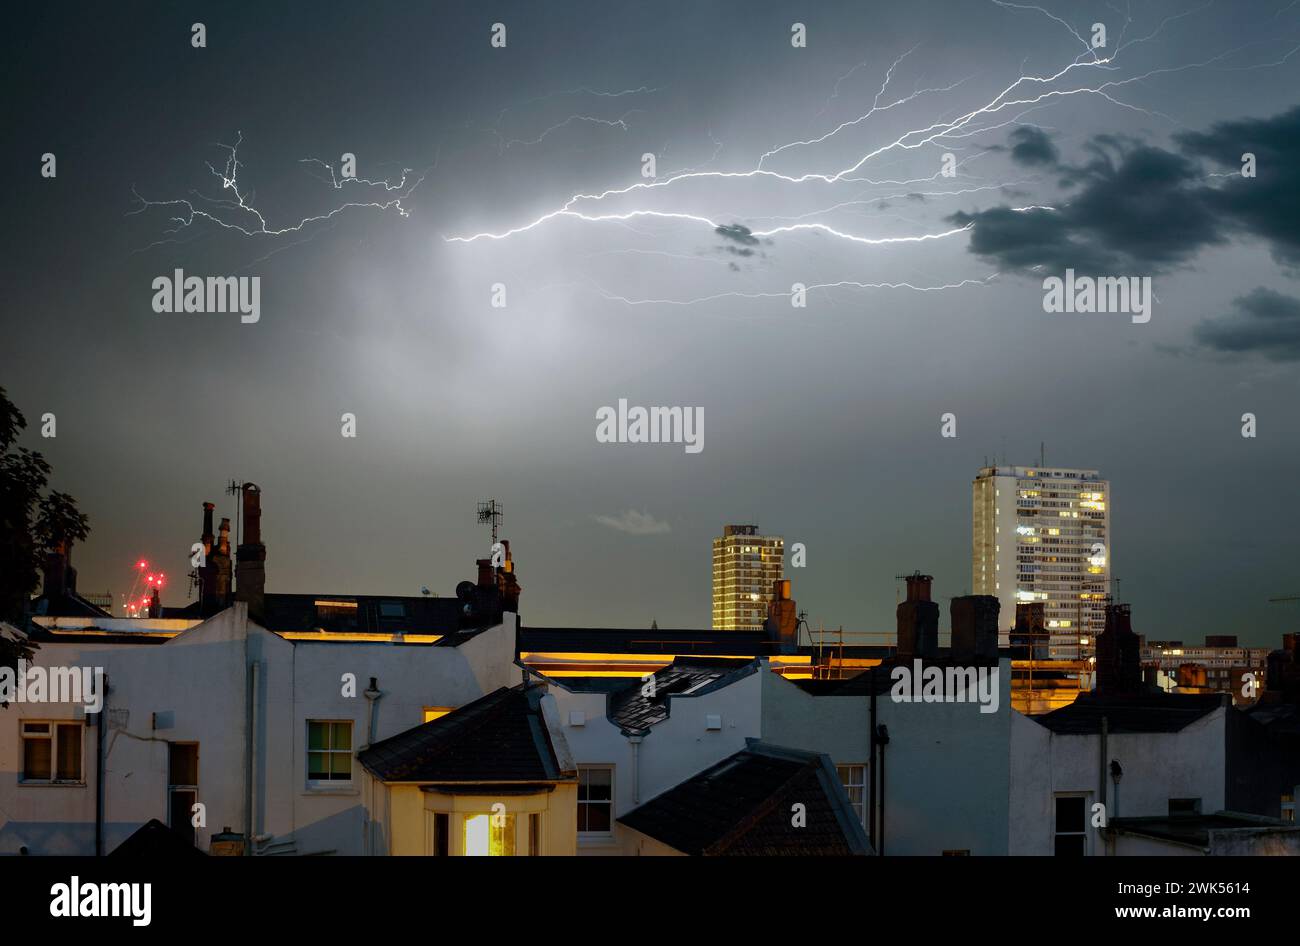 A summer storm lights up the night sky over Brighton. Stock Photo